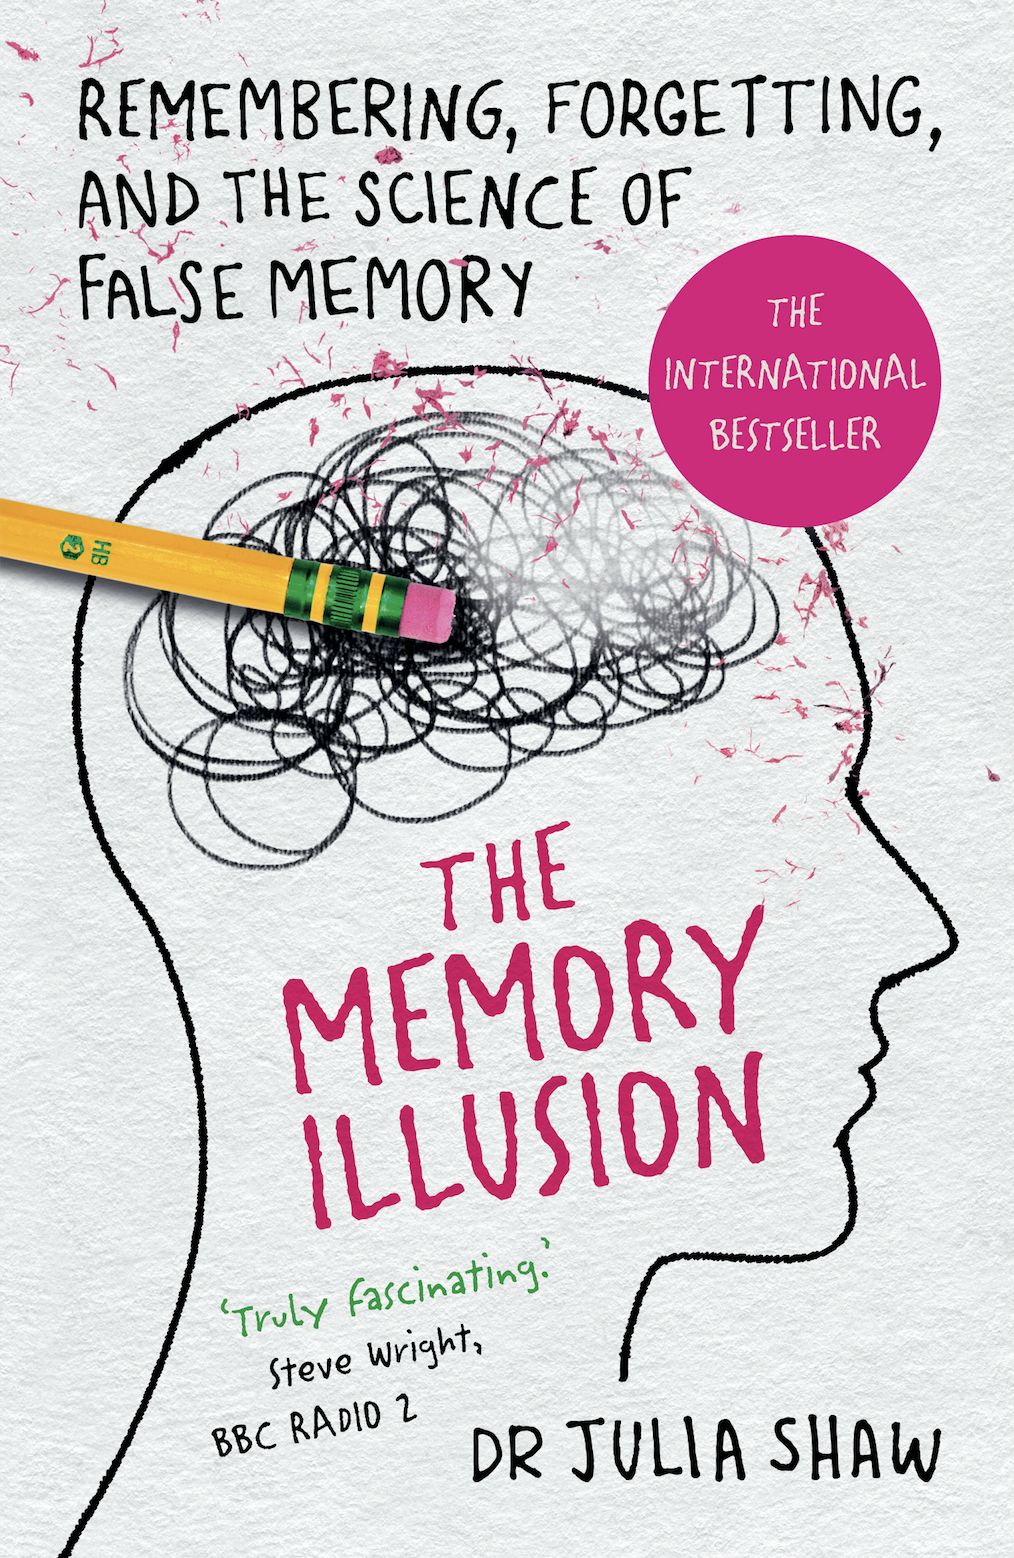 The Memory Illusion Paperback Dr Julia Shaw.png